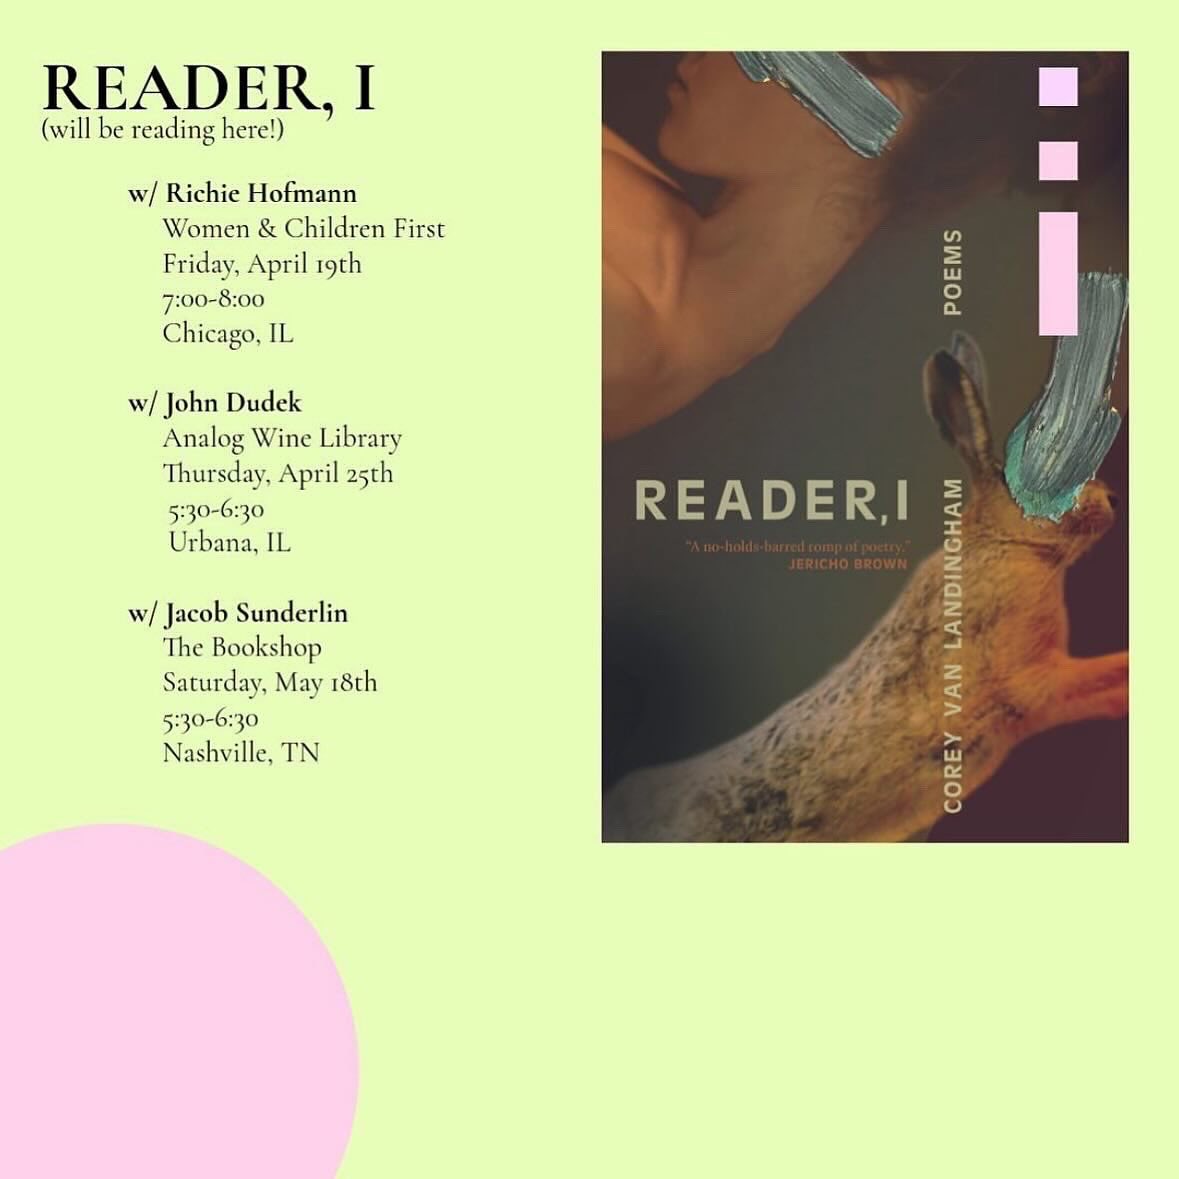 Corey Van Landingham’s READER, I hits shelves 4/16! Swipe to find out where you can catch Van Landingham reading this spring, and visit the link in our bio to pre-order your copy! ✨